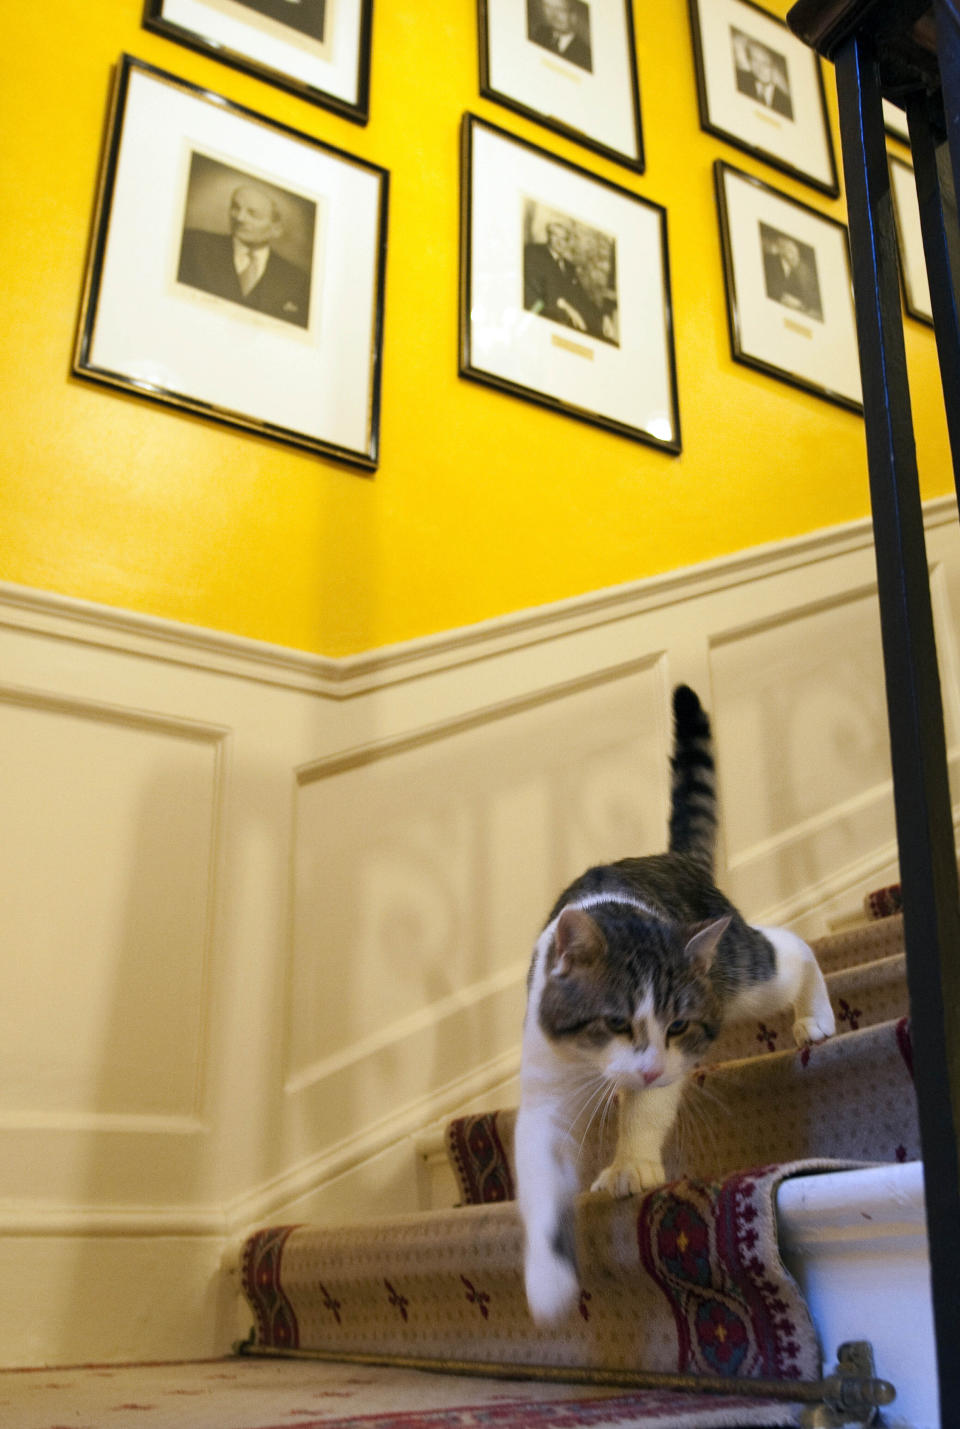 FILE - In this Tuesday Feb. 15, 2011 file photo, Larry the new cat for 10 Downing Street, walks down the stairs of the Prime Minister David Cameron's official residence in London. Monday, Feb. 15, 2021 marks the 10th anniversary of rescue cat Larry becoming Chief Mouser to the Cabinet Office in a bid to deal with a rat problem at 10 Downing Street. (Mark Large/Pool photo via AP, file)